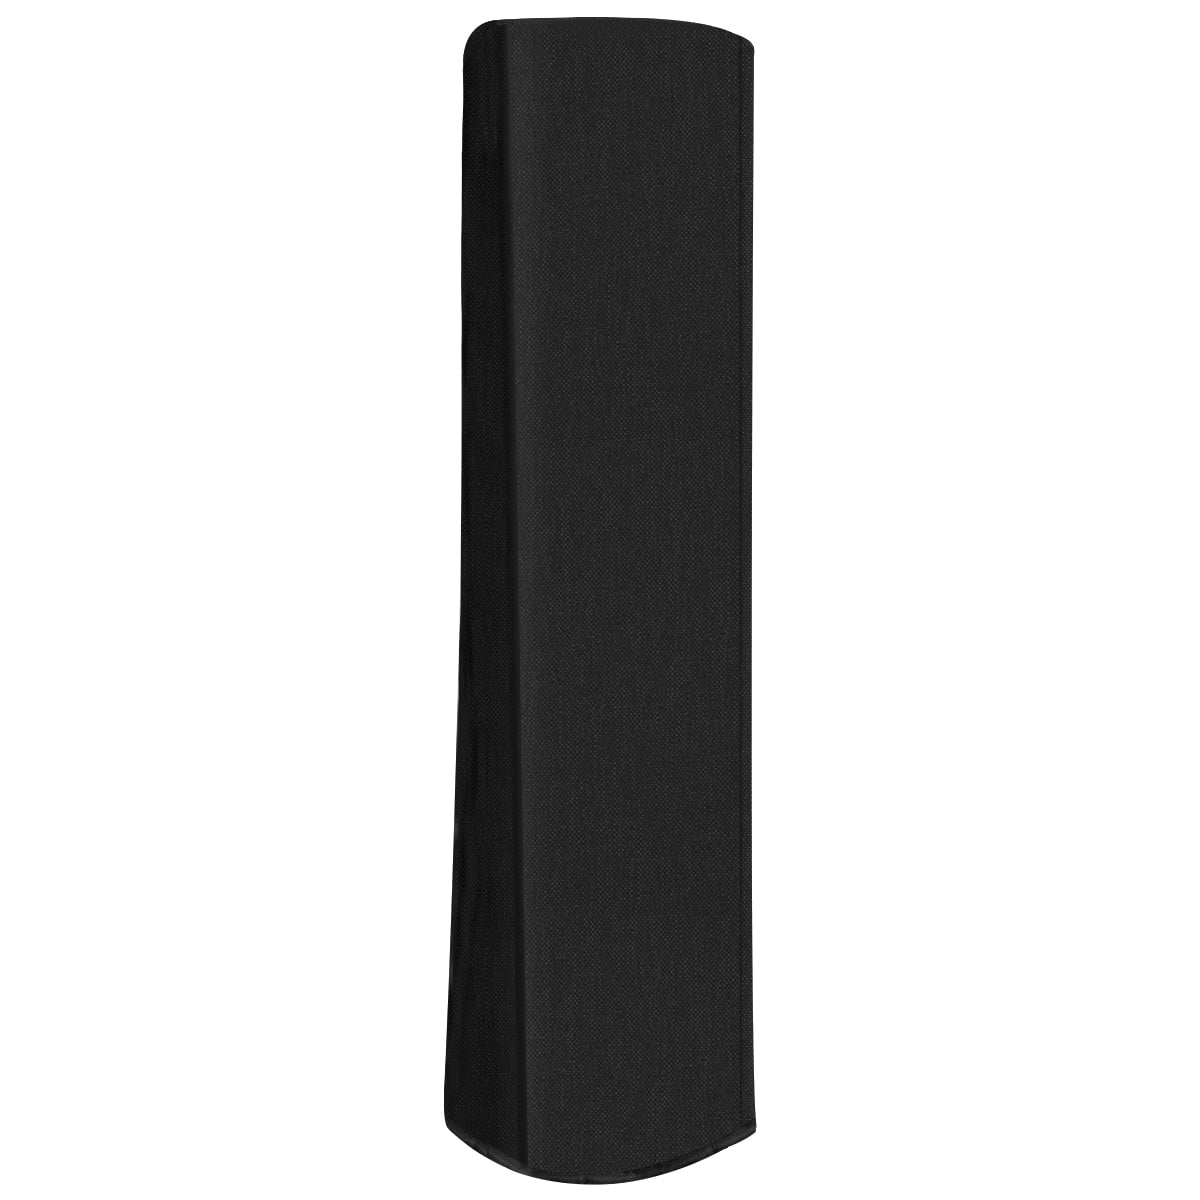 Yunhigh Tall Glass Tube Heater Cover 1 PC;Black Patio Heater Heavy Waterproof Square Dust Cover 